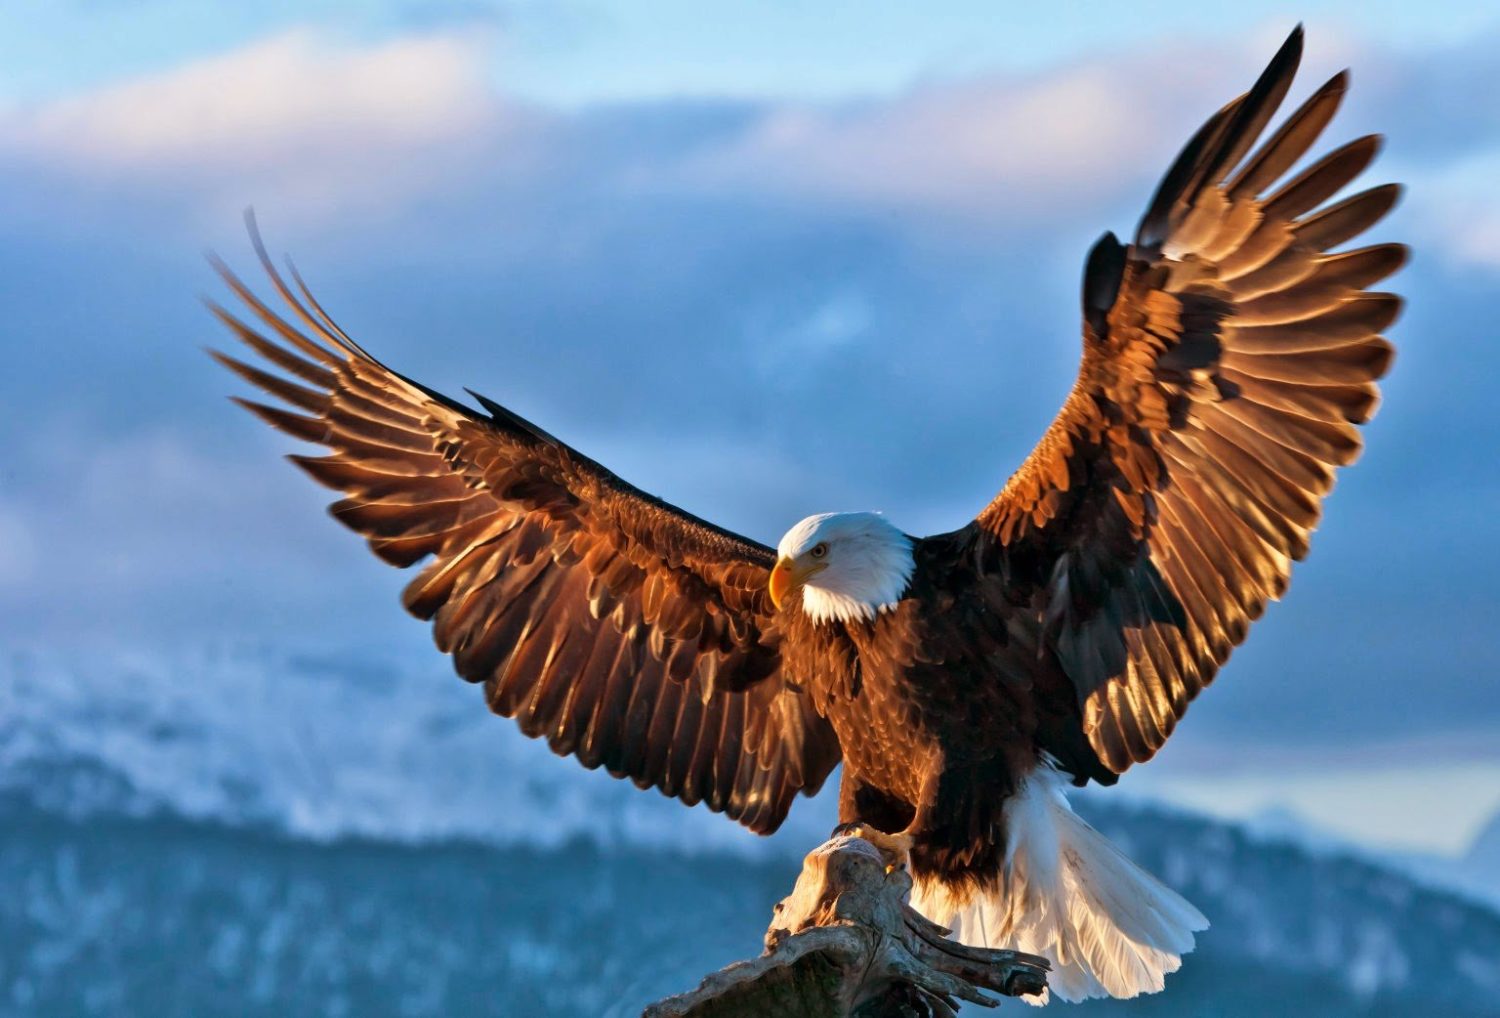 A close up of an eagle landing with it's wings open